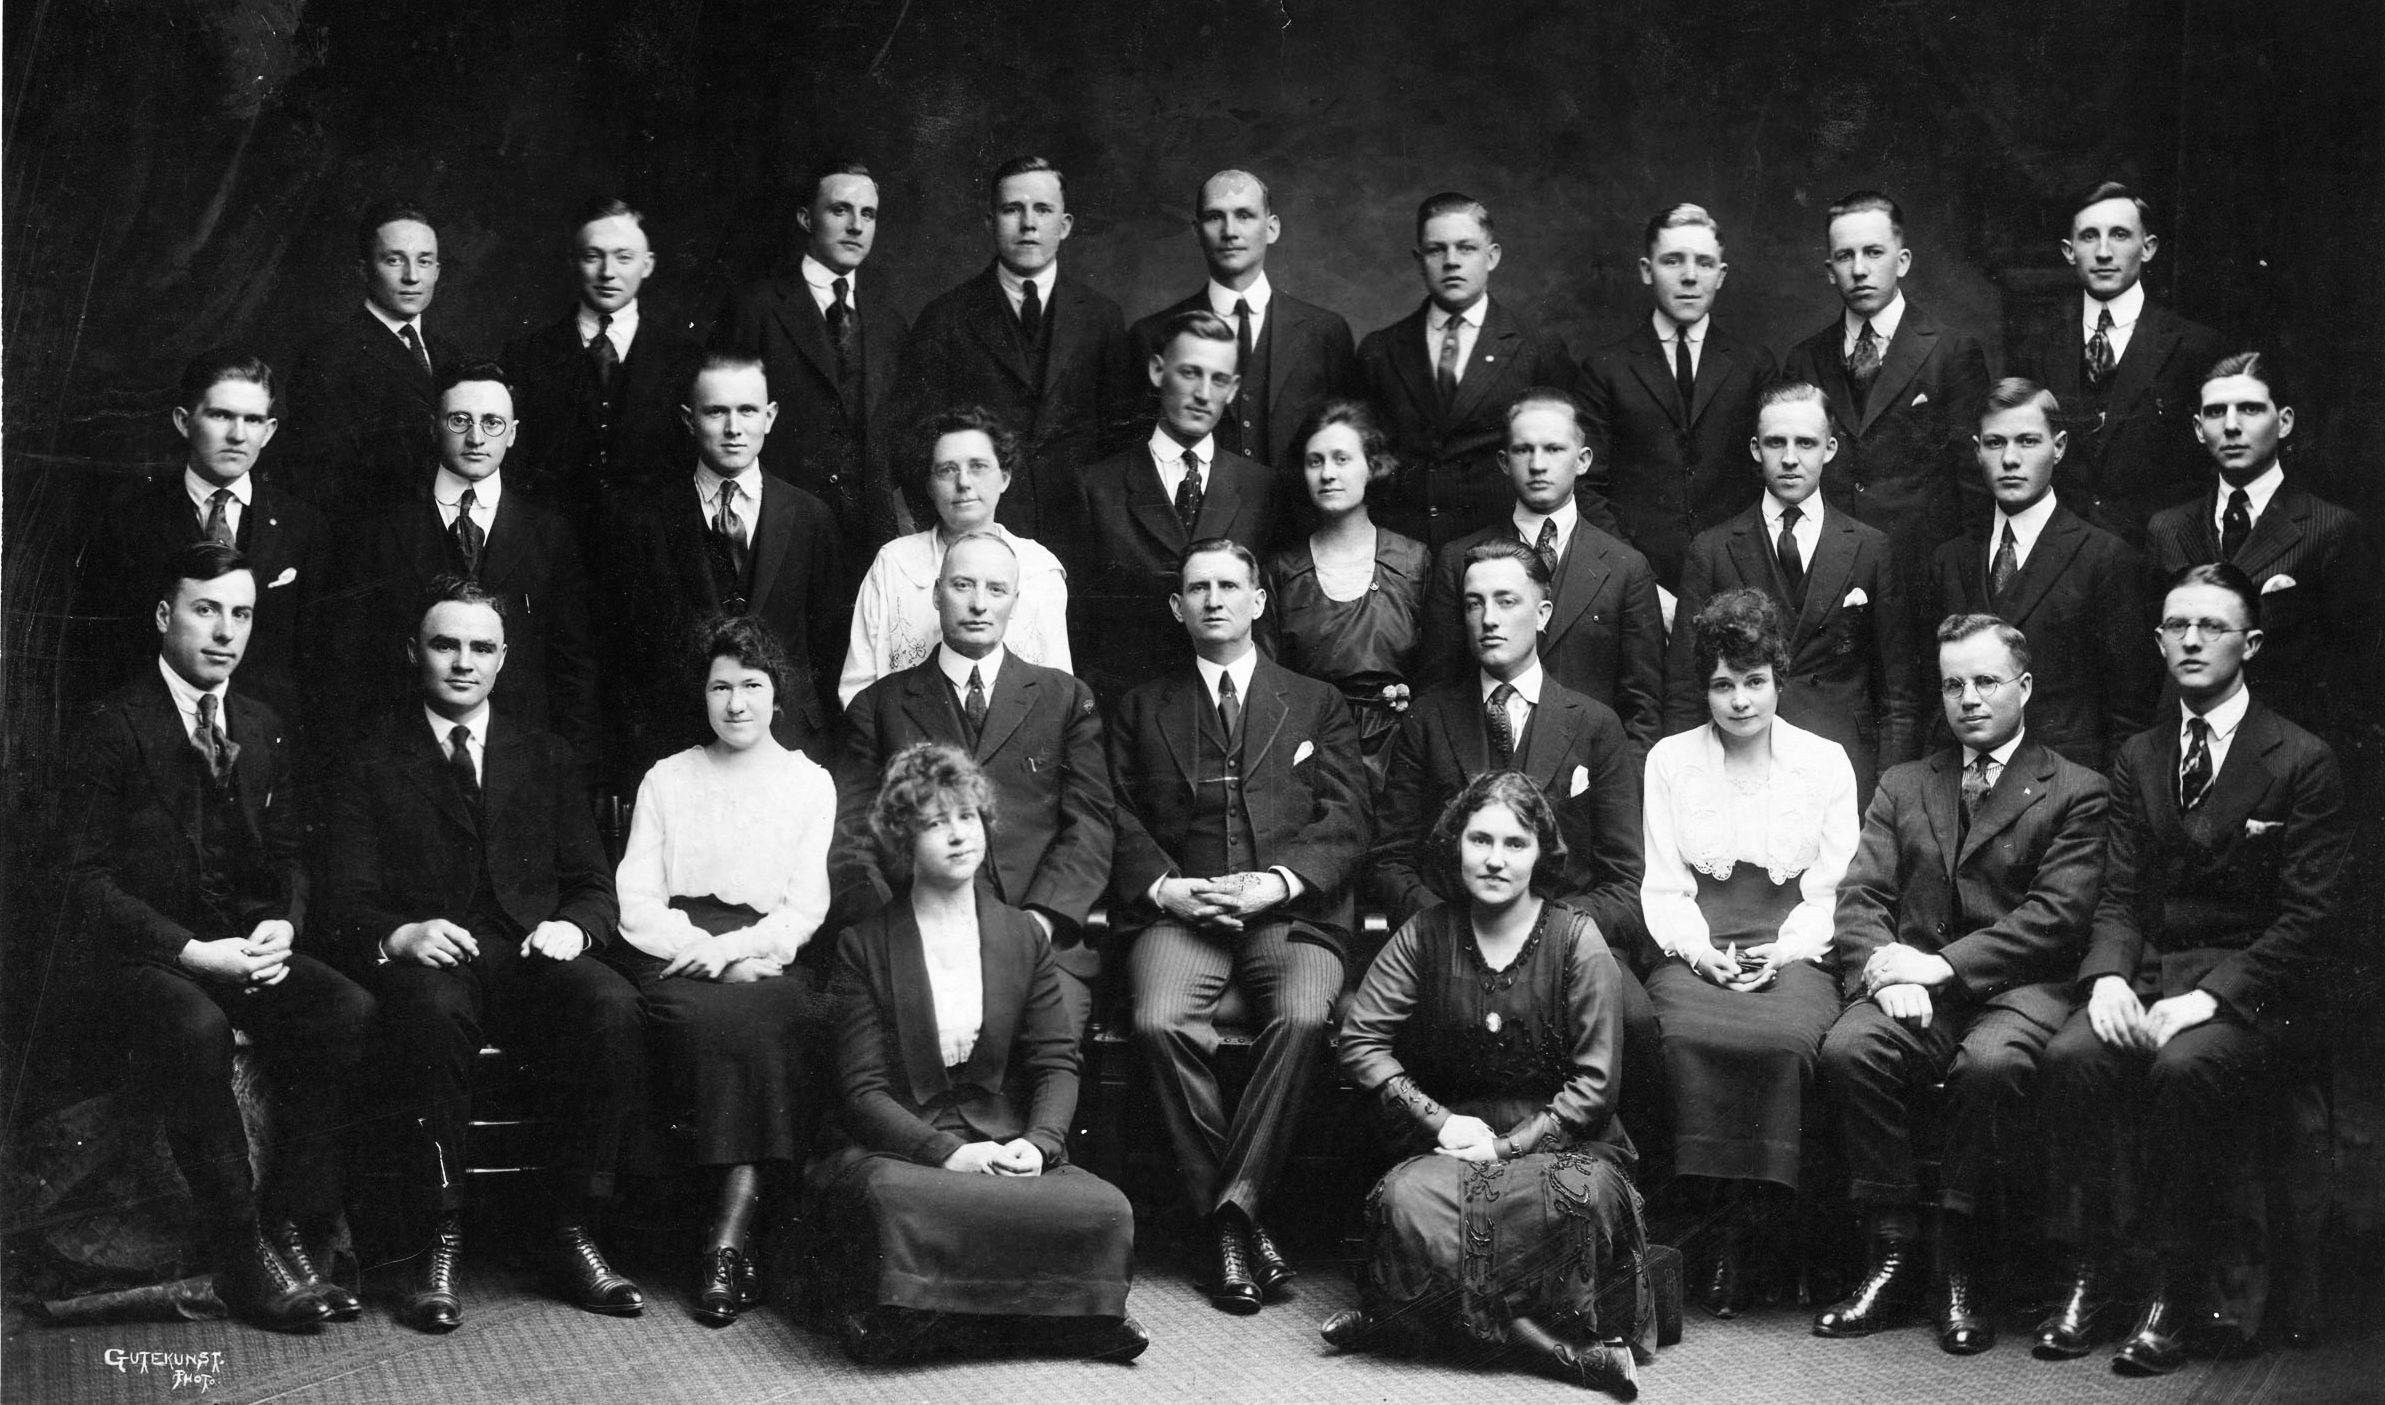 March 1921, Pennsylvania Conference